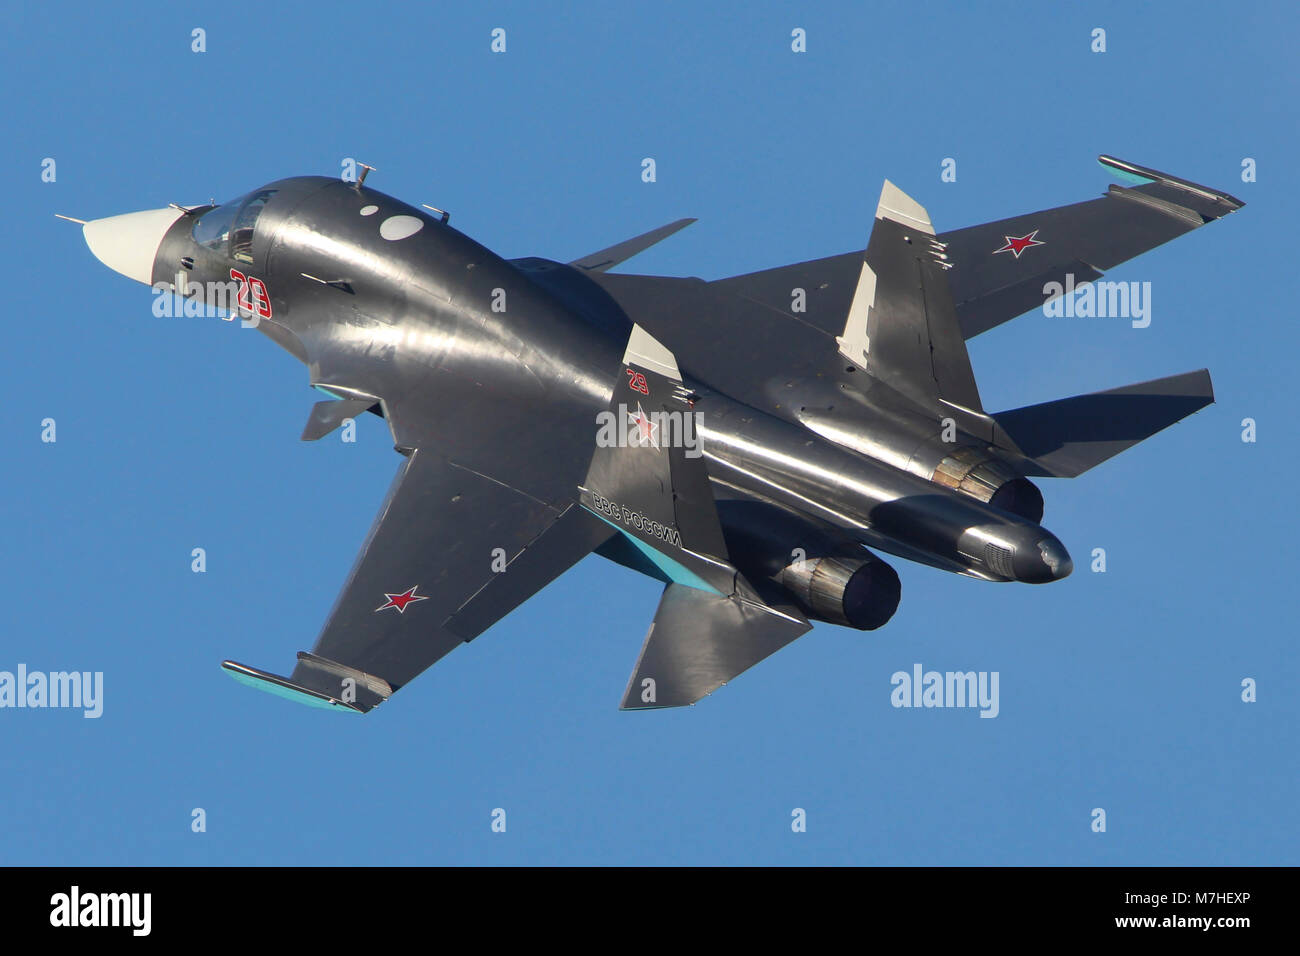 Su-34 attack aircraft of the Russian Air Force. Stock Photo